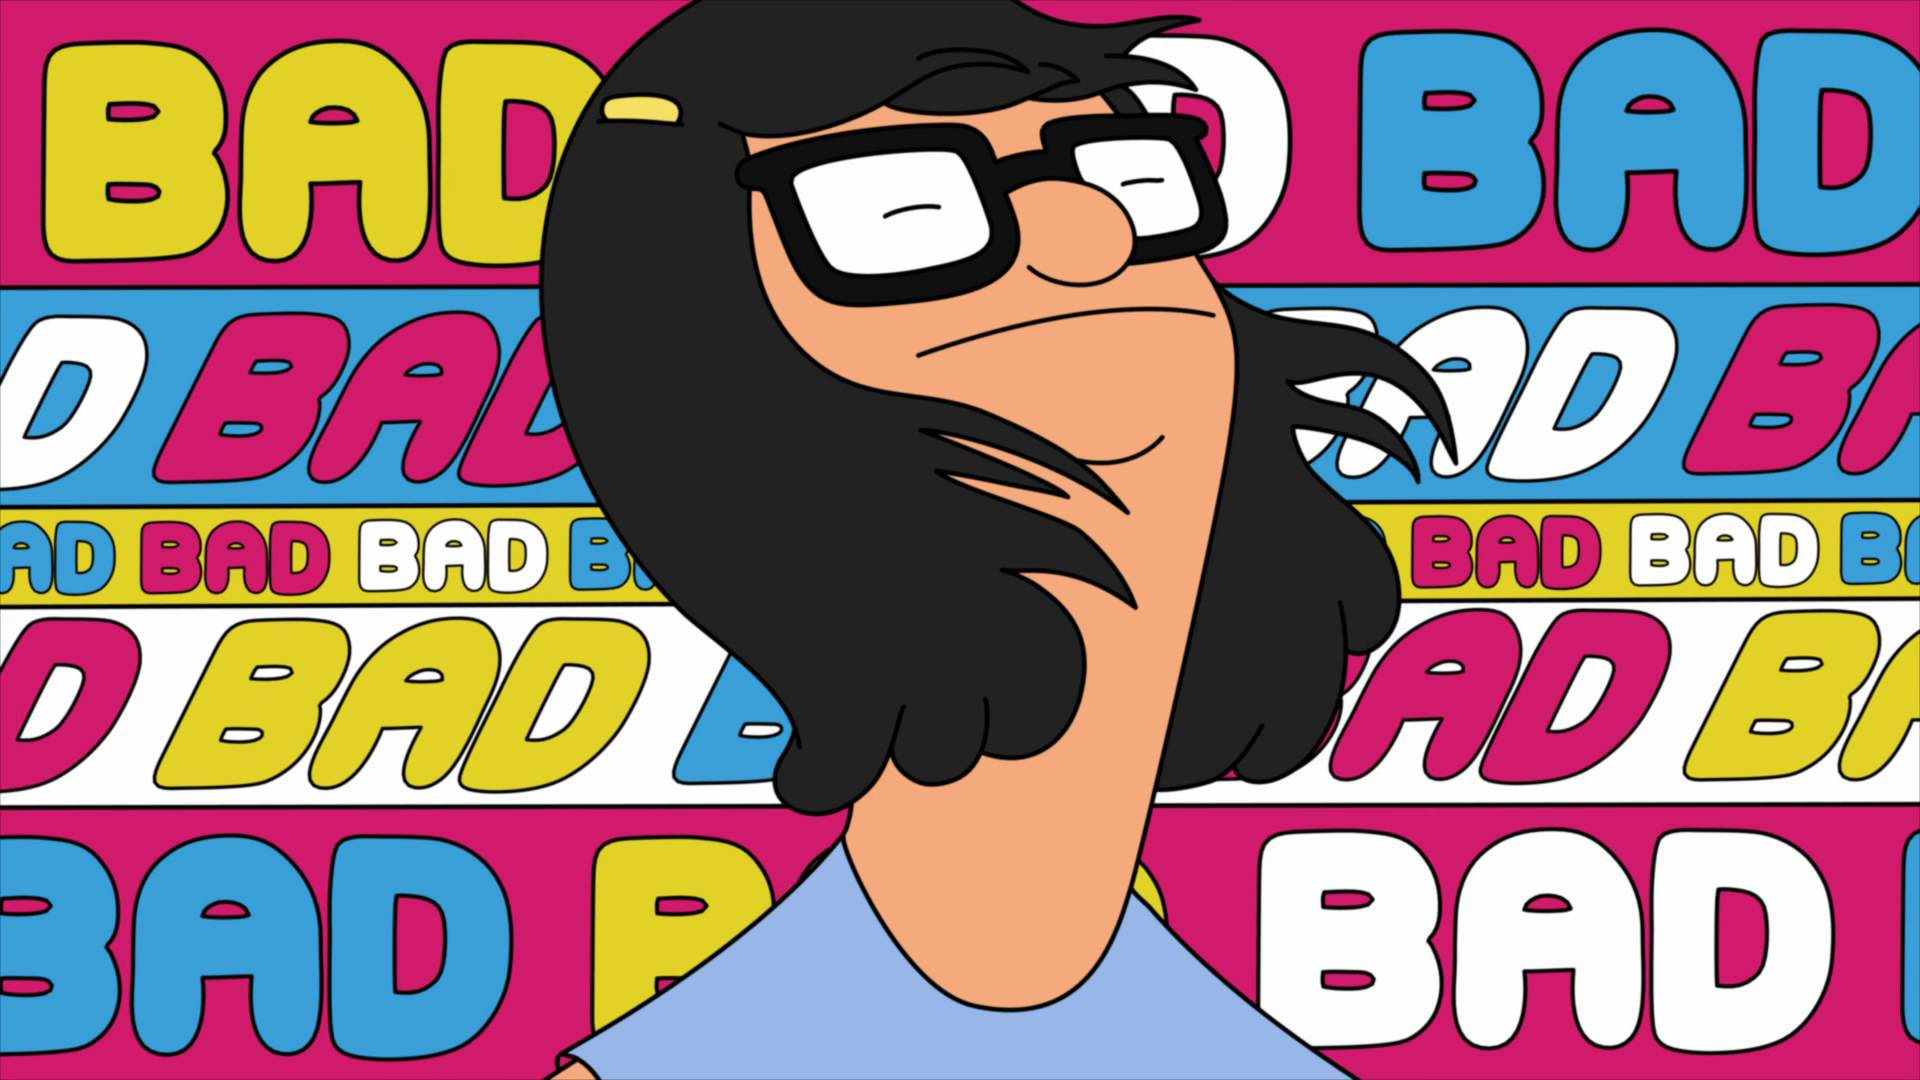 Tina Belcher showcasing her unique personality in a classic pose. Wallpaper